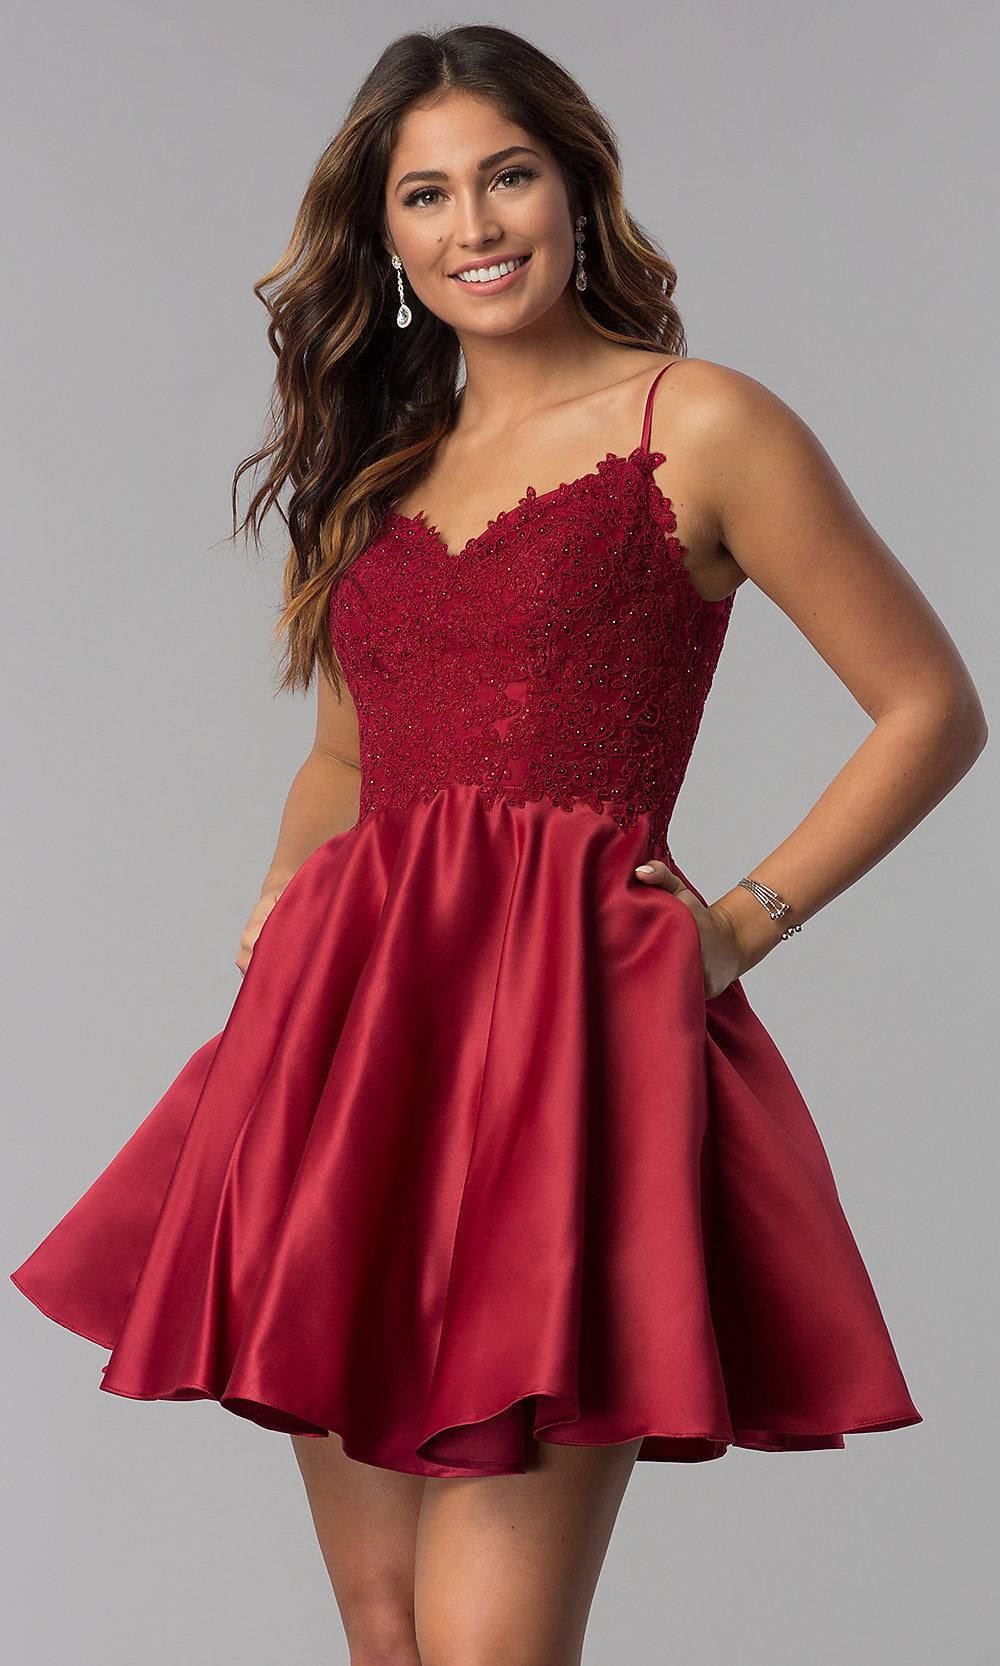 Embroidered-Lace-Applique Homecoming Dress - PromGirl